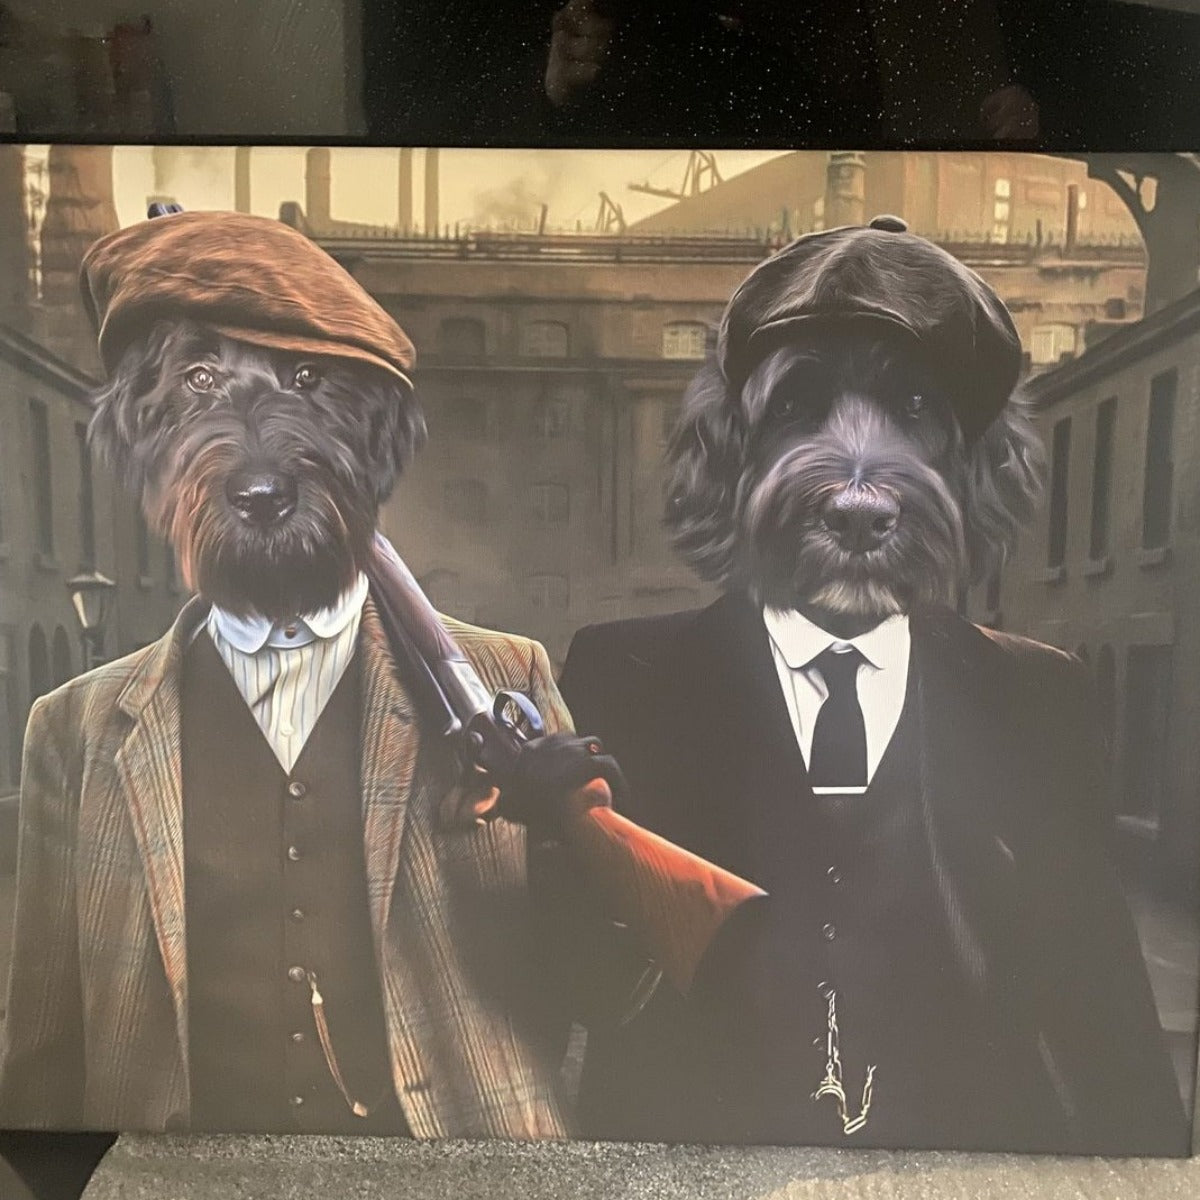 The 2 Brothers (Peaky Blinders Inspired): Custom Pet Canvas - Paw & Glory - #pet portraits# - #dog portraits# - #pet portraits uk#paw & glory, custom pet portrait canvas,pet photo to canvas, dog portraits canvas, pet canvas portrait, pet canvas print, dog photo on canvas